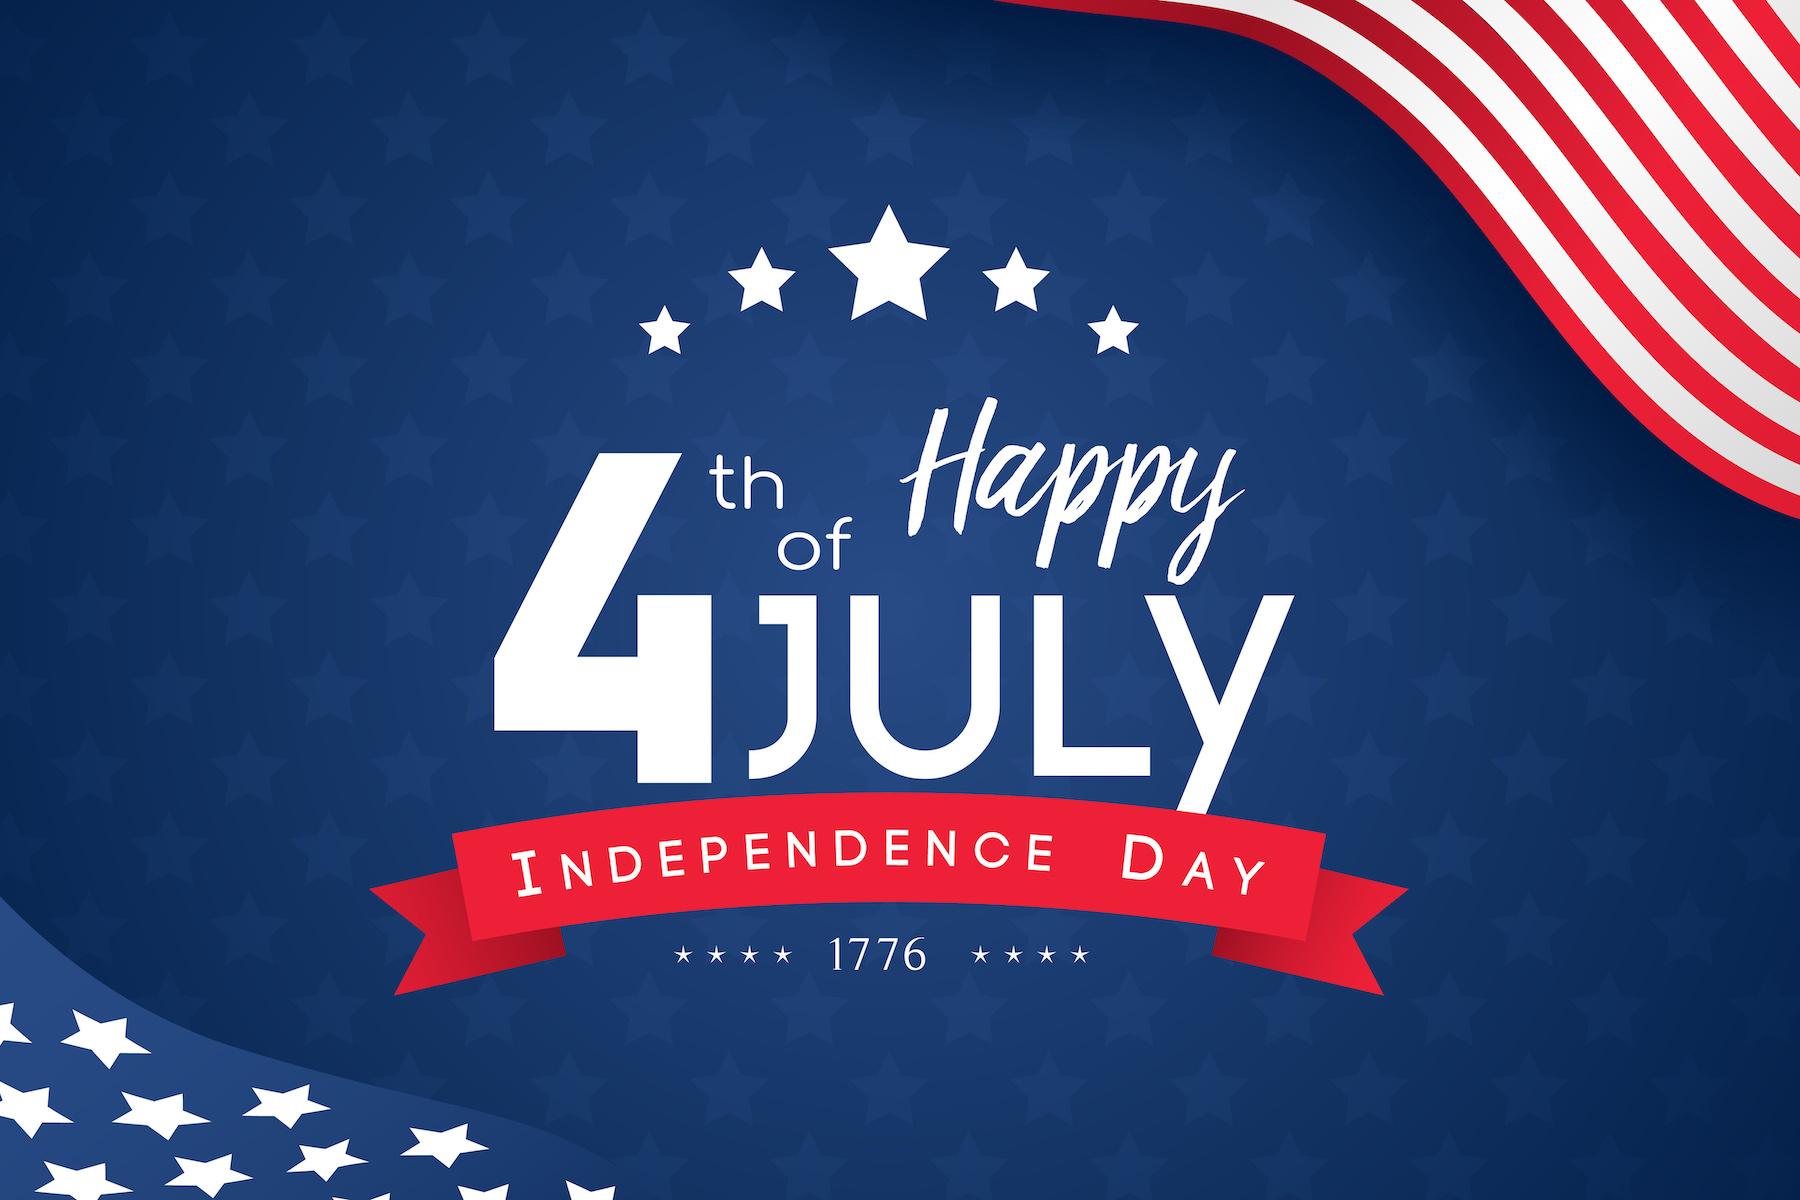 Happy 4th of July - Independence Day From OST Global Solutions